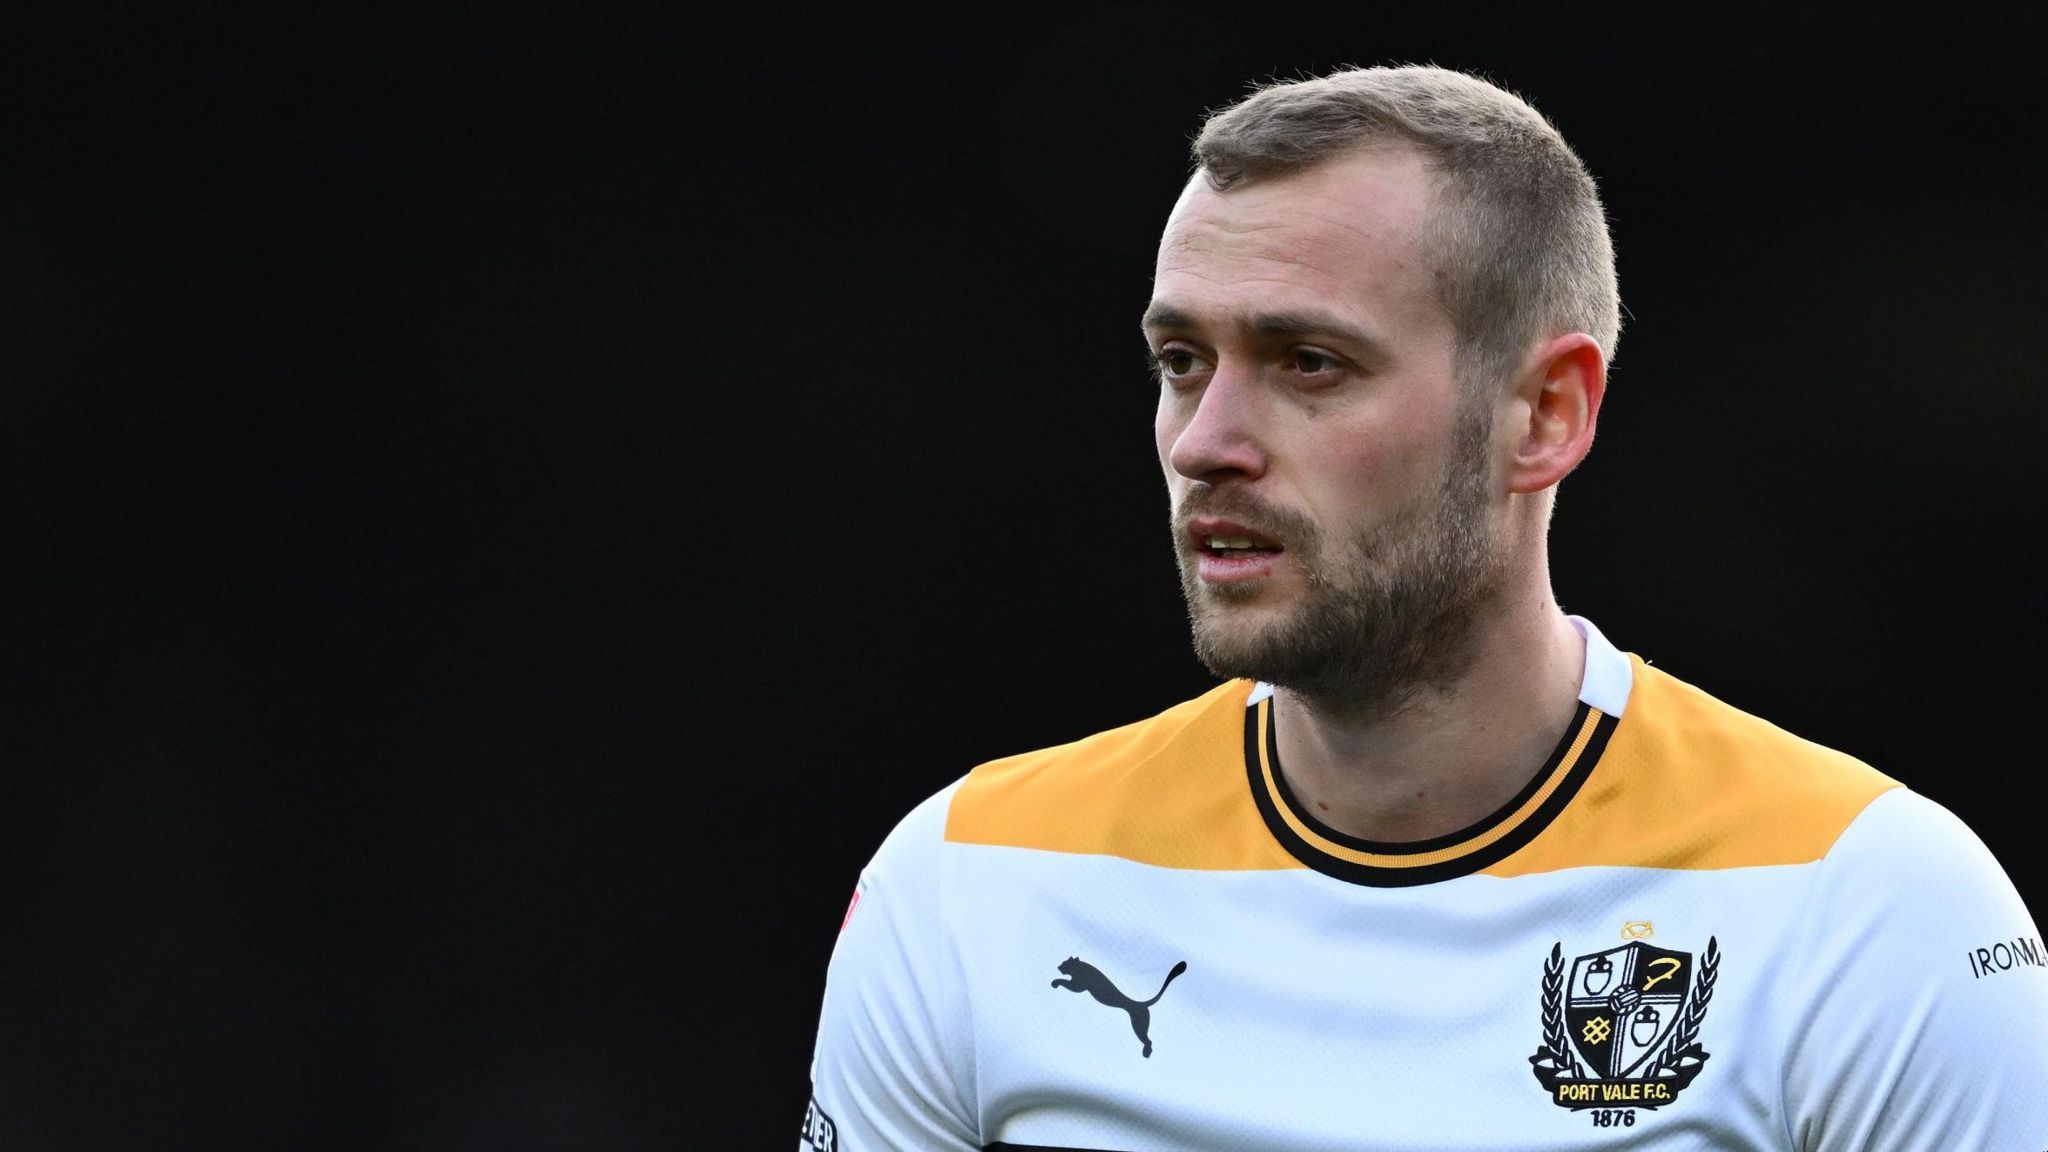 James Wilson in action for Port Vale